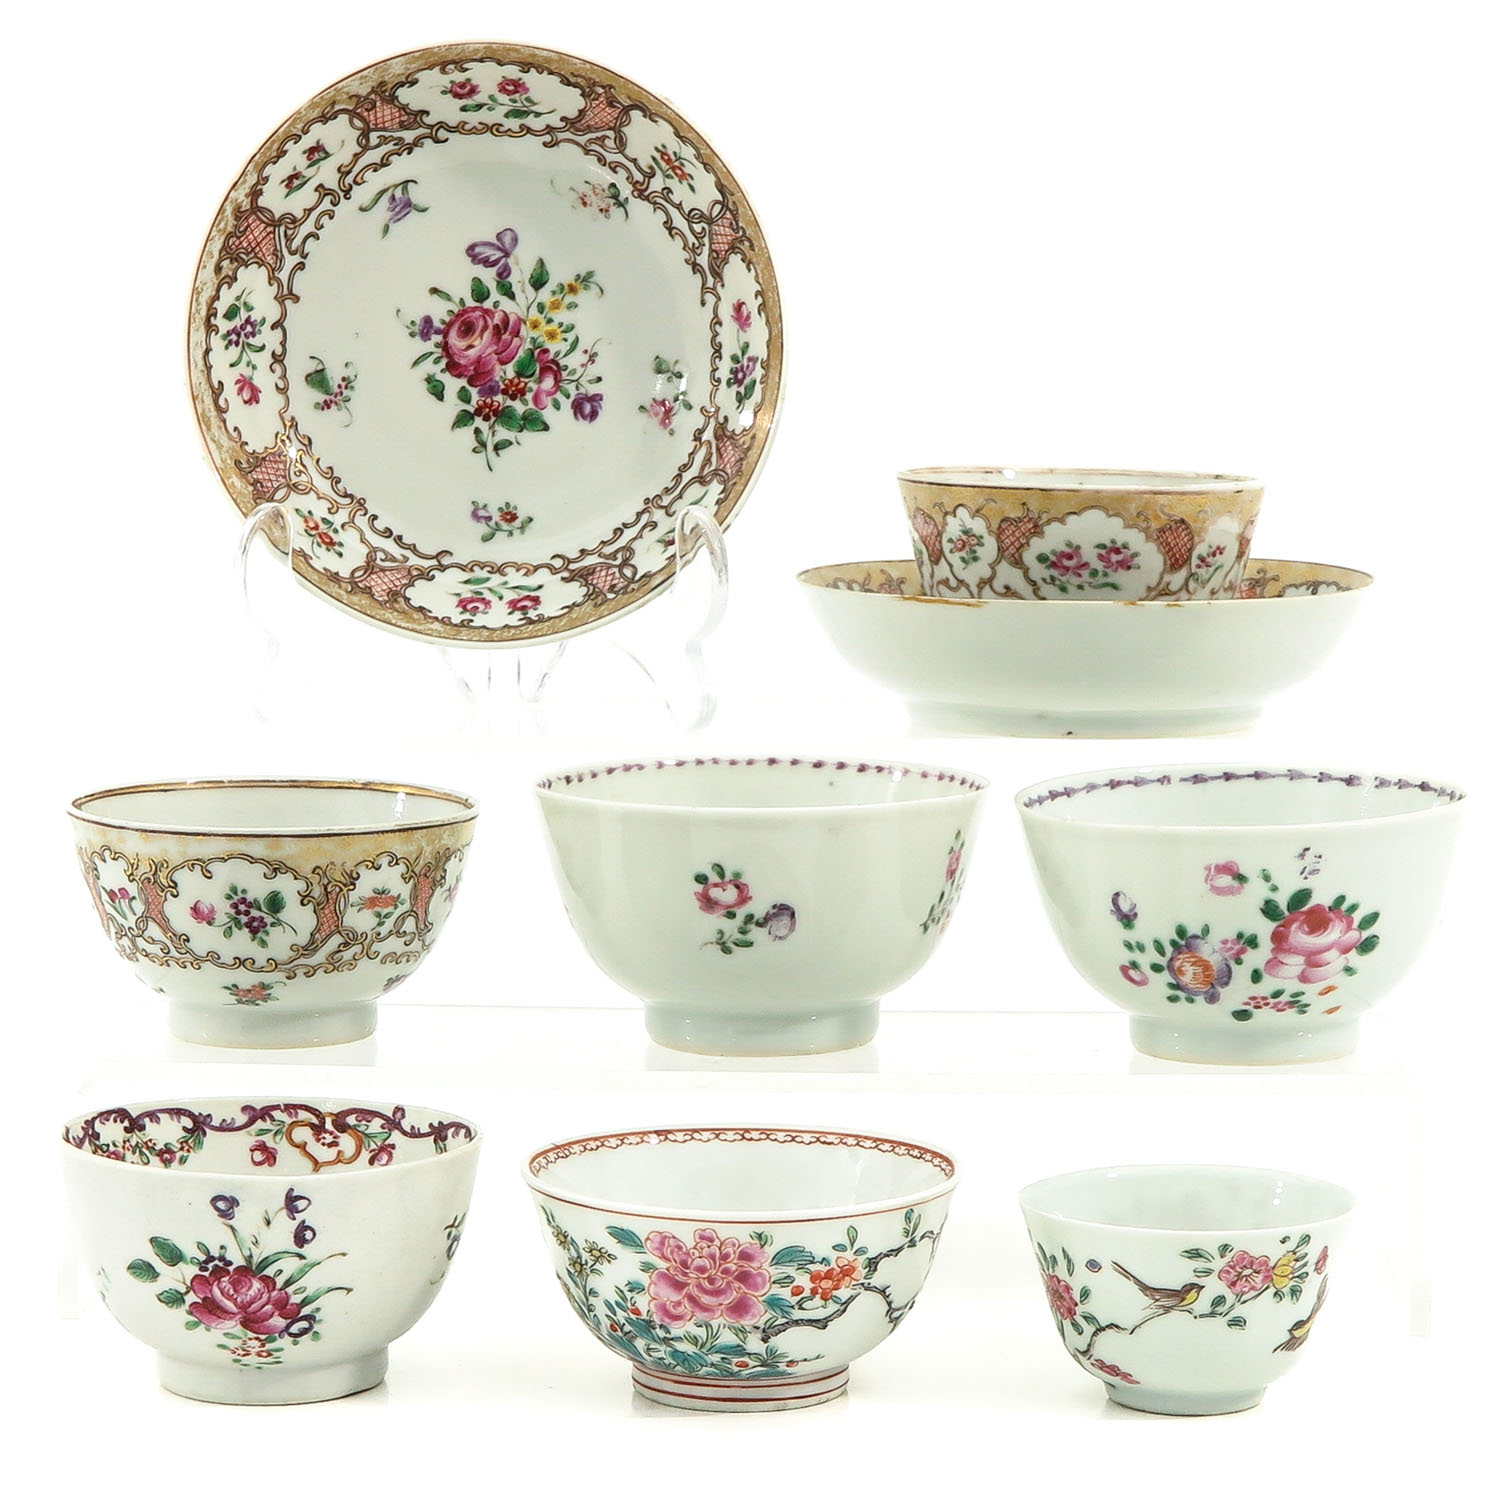 A Collection of Famille Rose Cups and Saucers